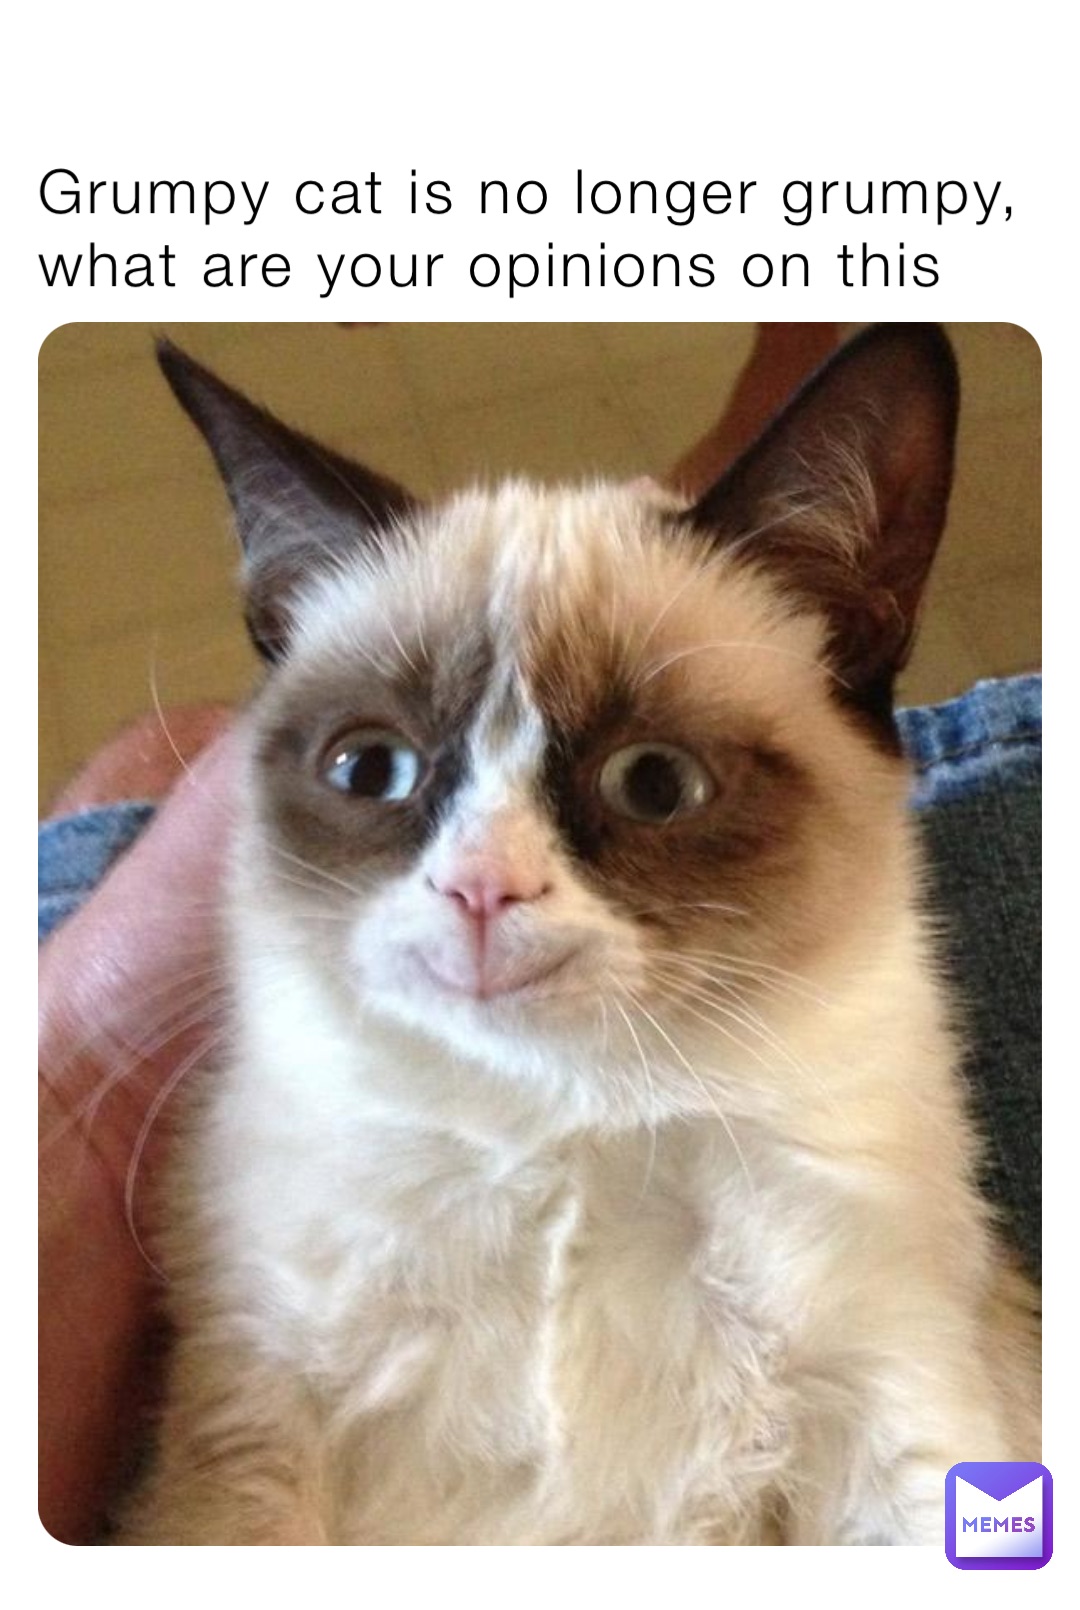 Grumpy cat is no longer grumpy, what are your opinions on this